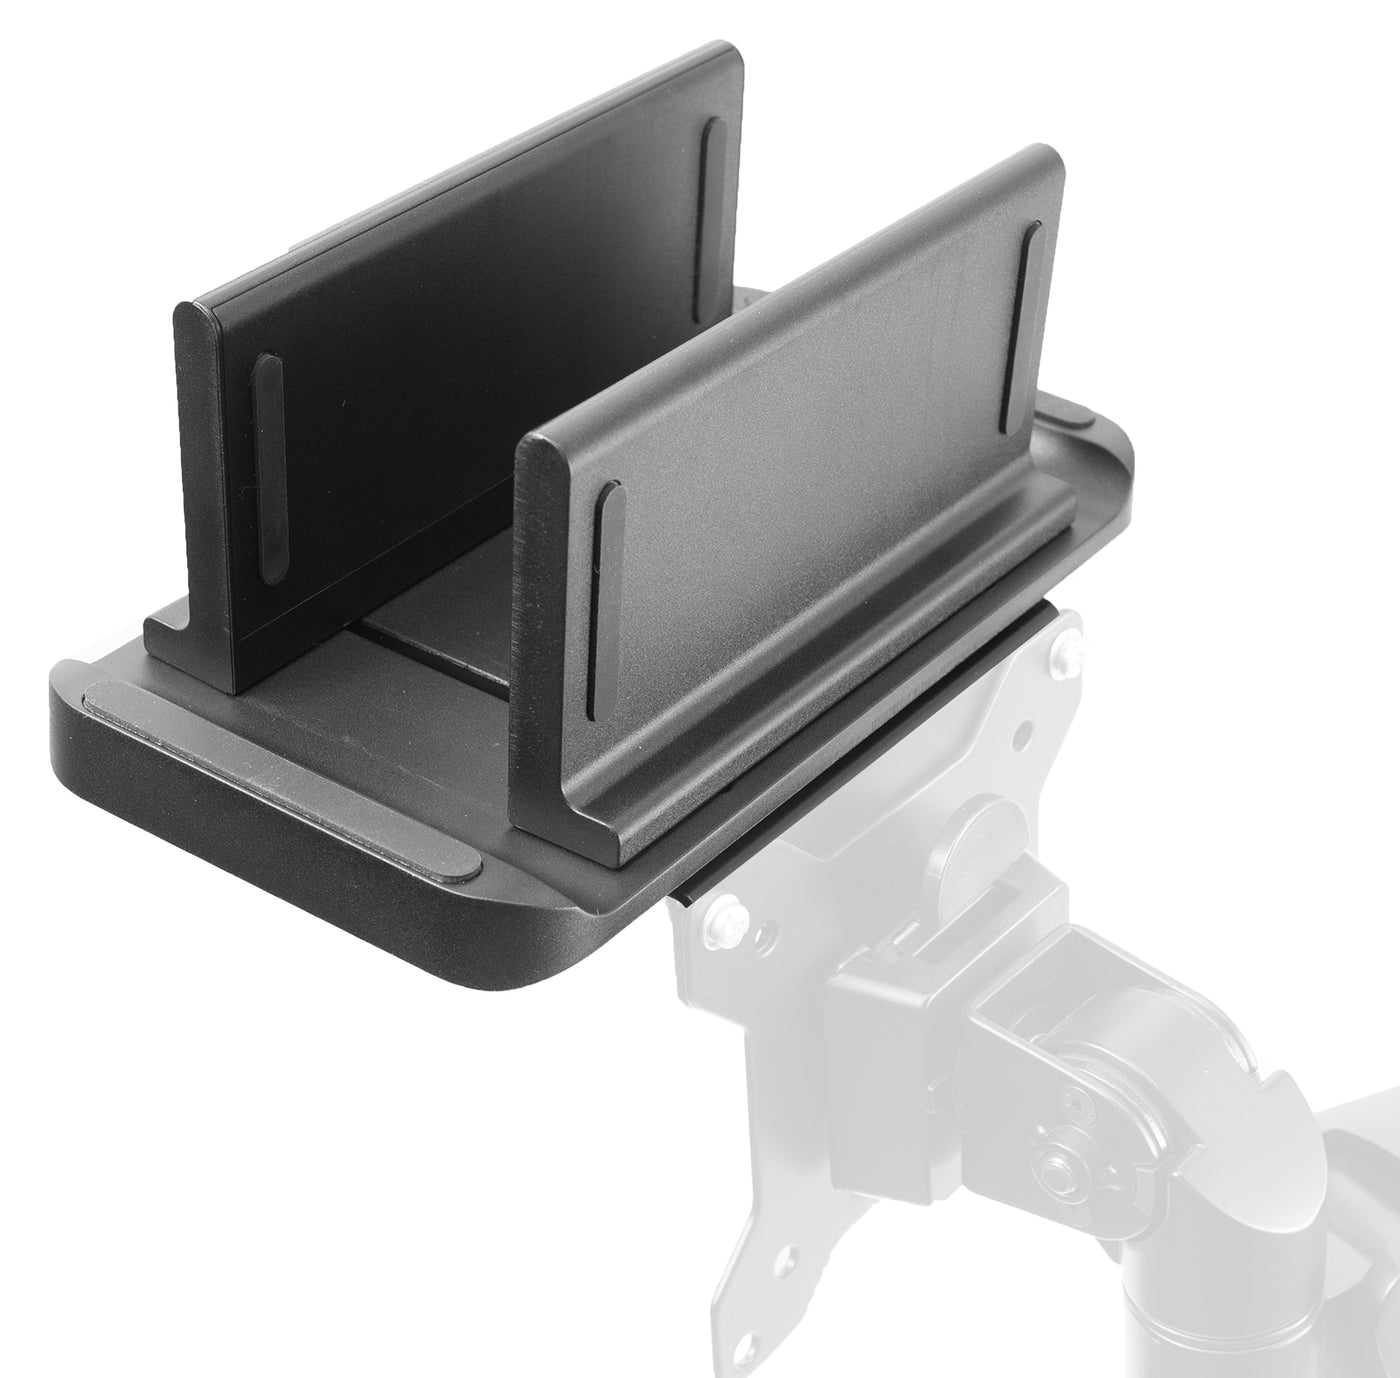 Multifunctional adjustable thin client mini PC mount can be installed on the back of a freestanding monitor, in between a monitor and VESA mount arm, or used as a freestanding holder on your desk. 